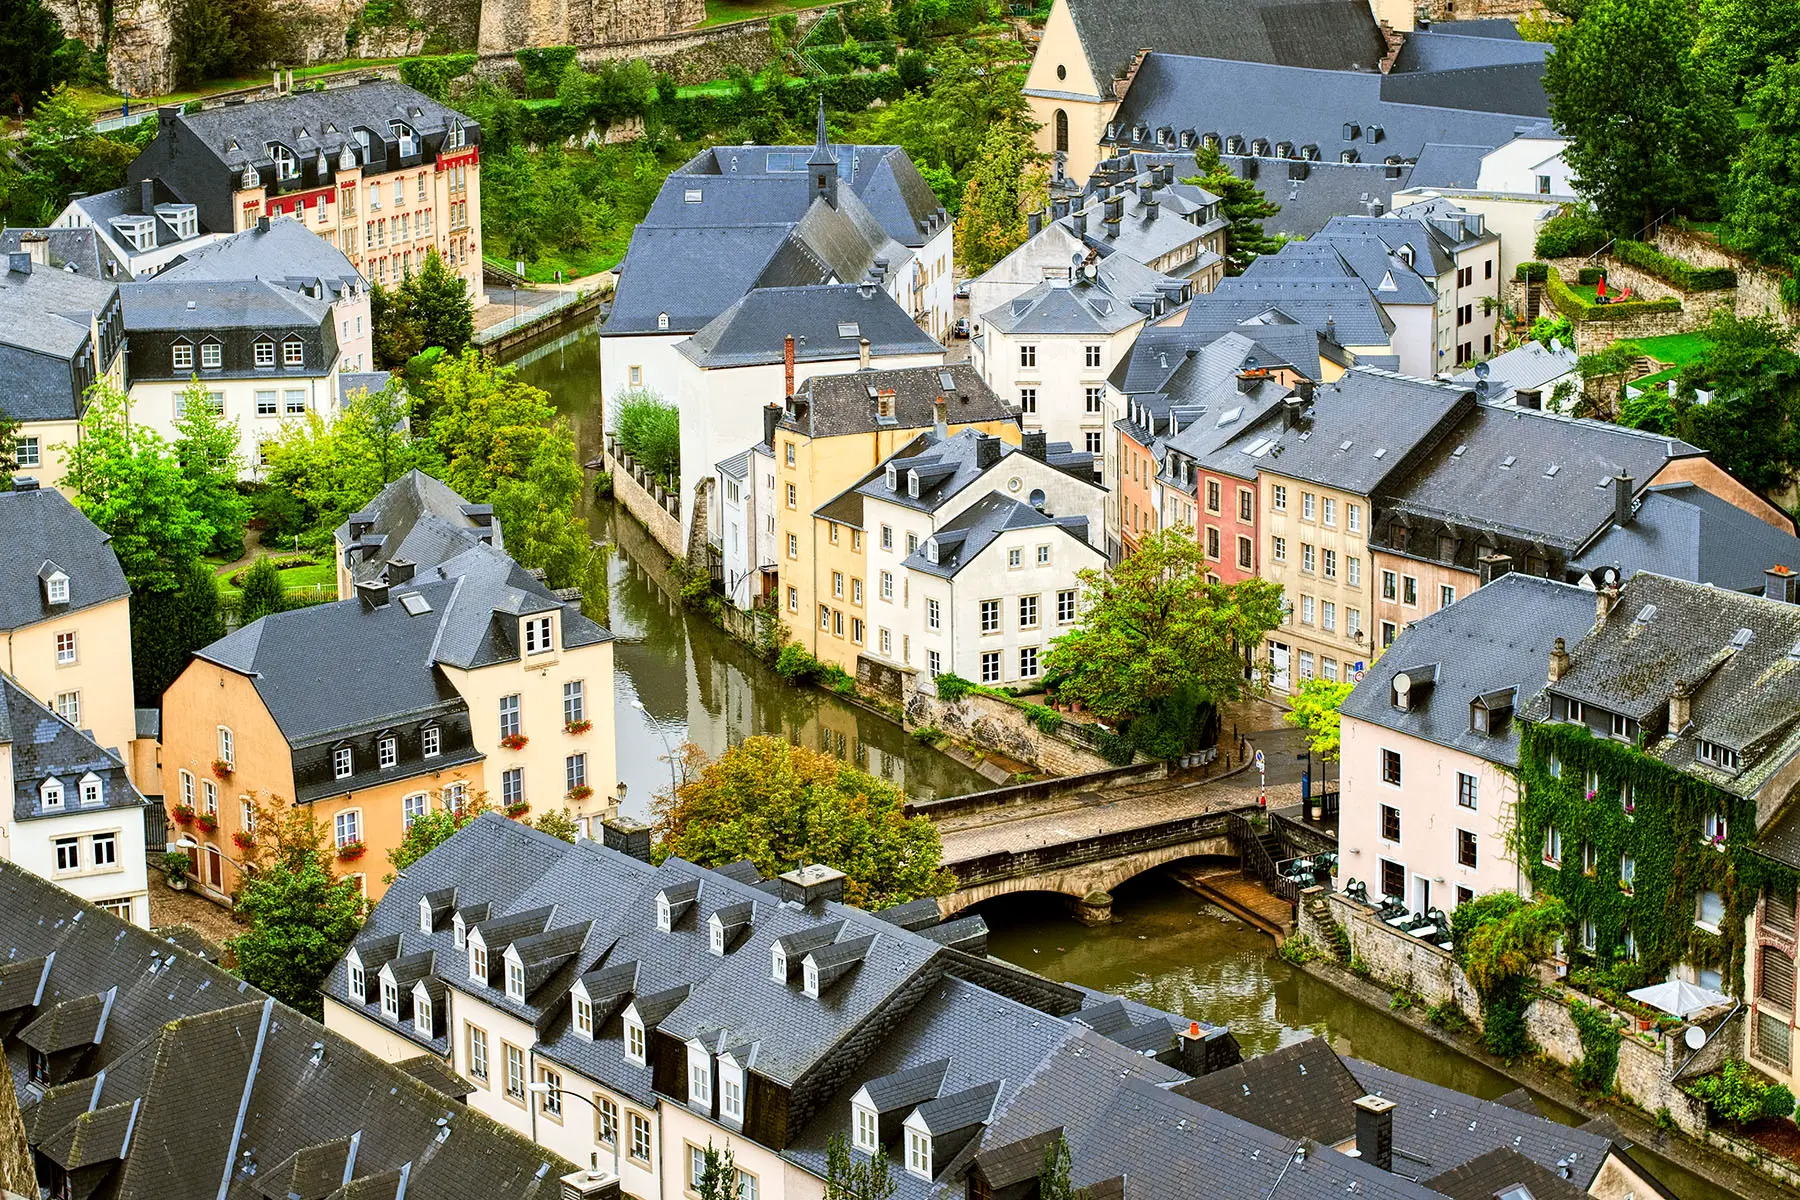 Houses in Luxembourg City